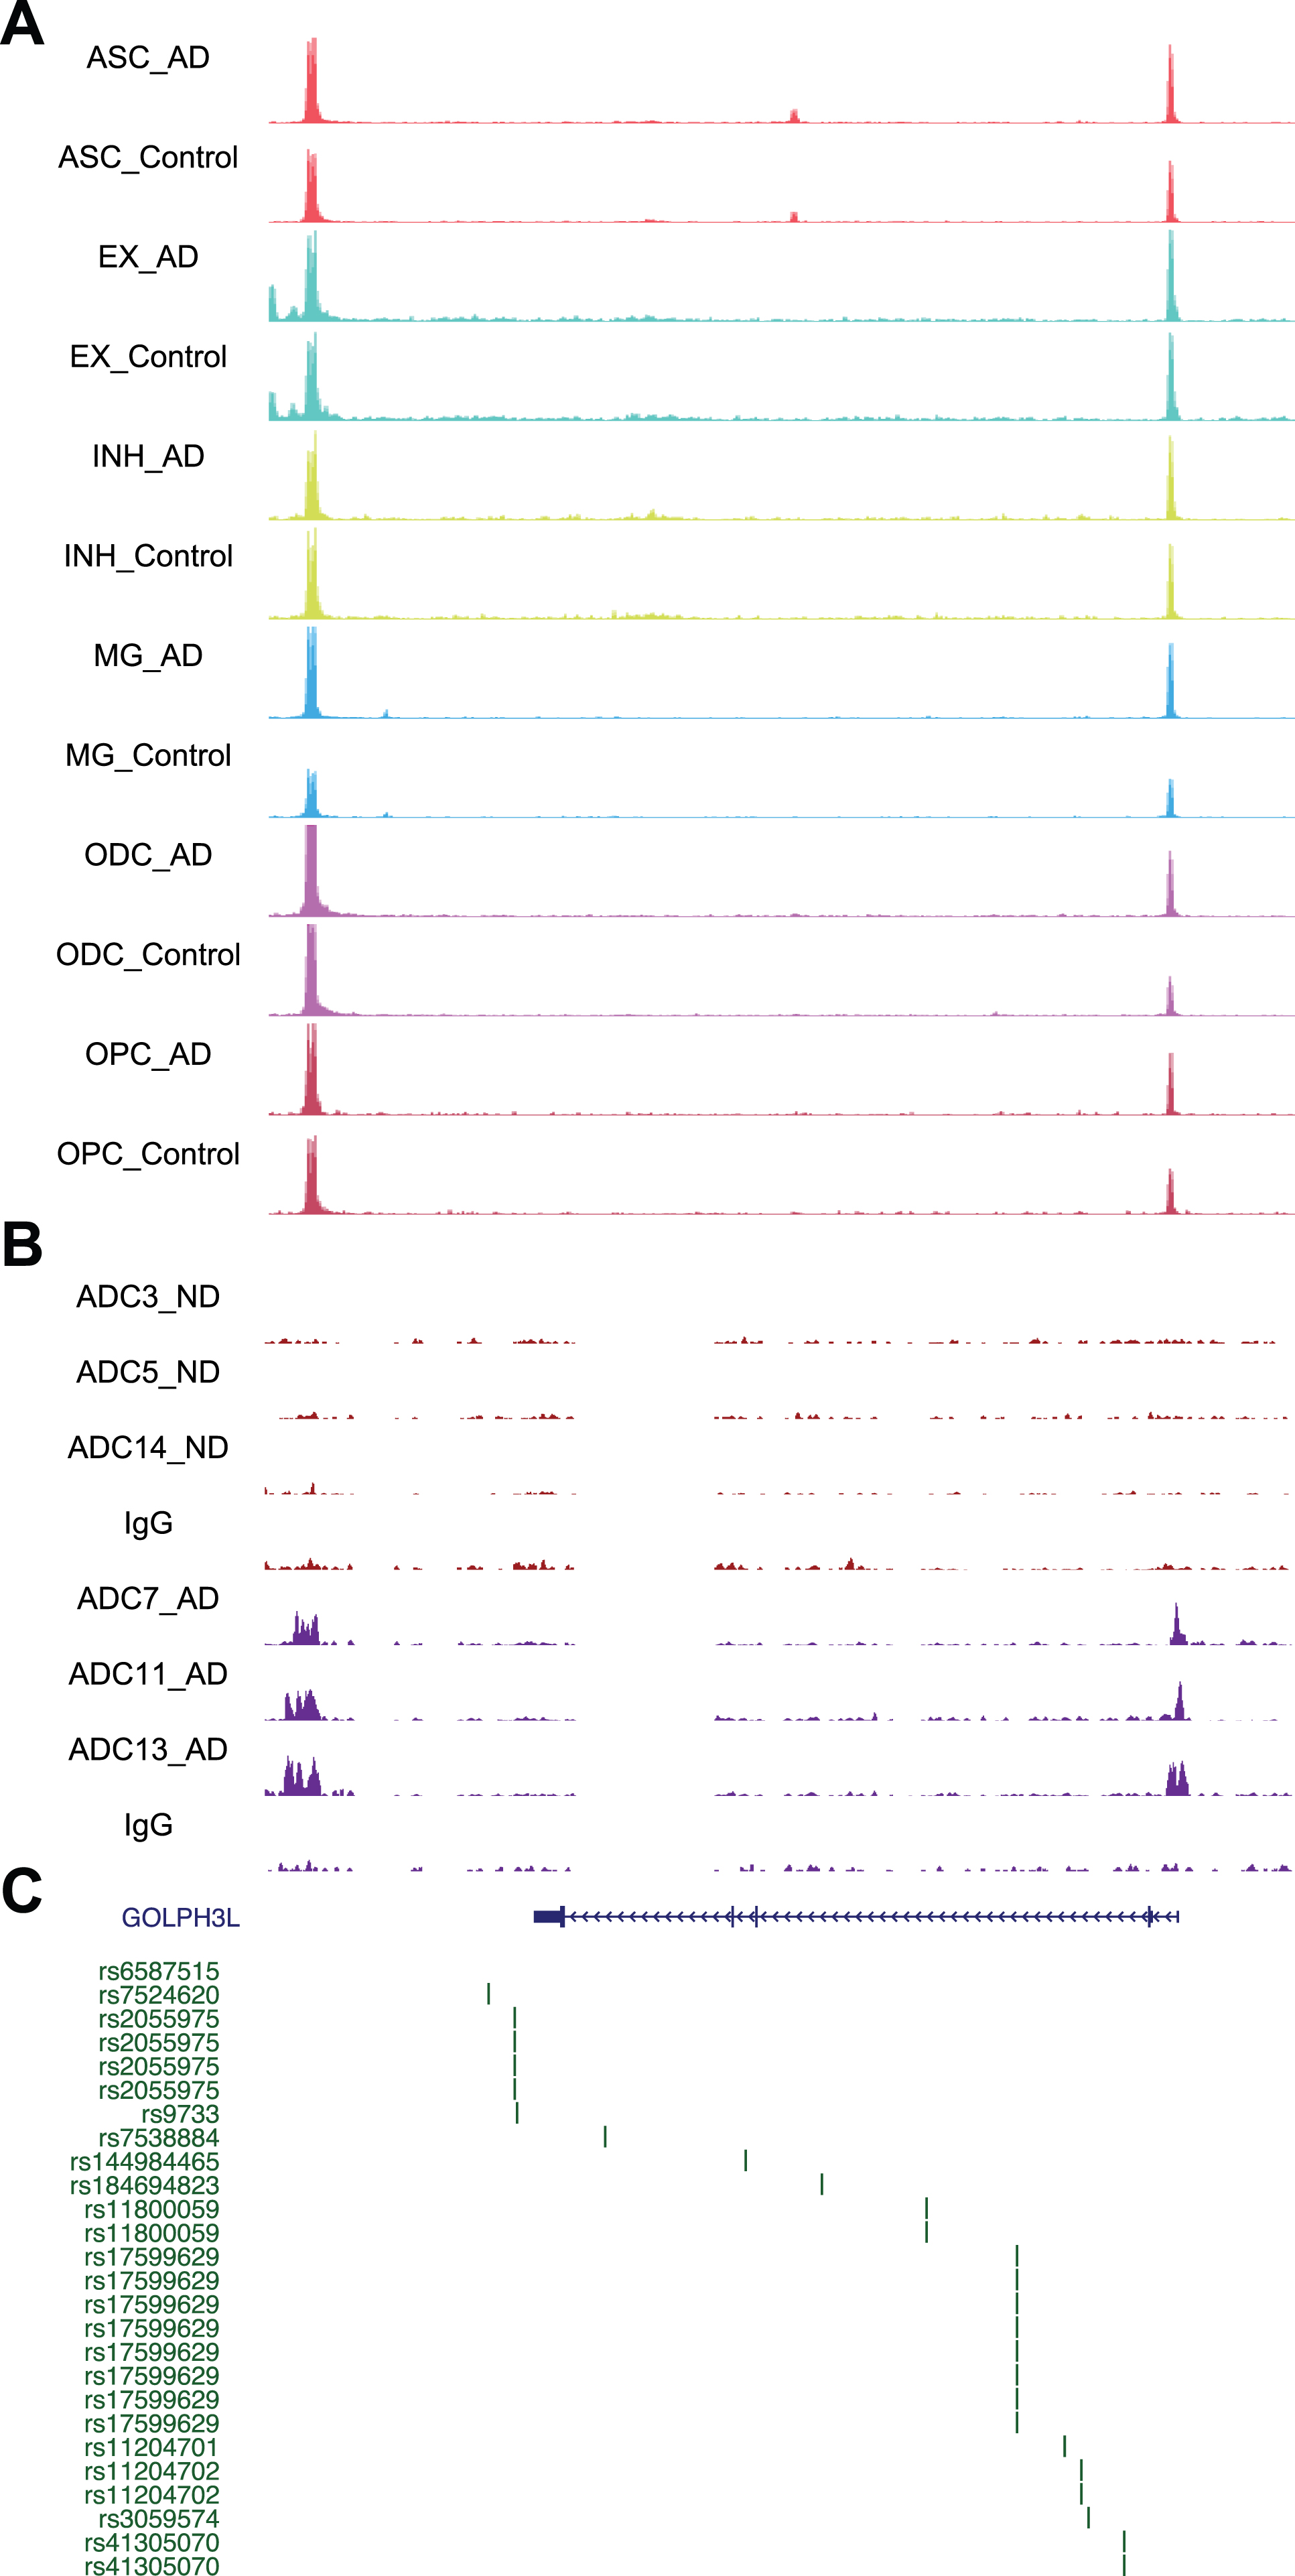 Chromatin accessibility, DSB sites, and GWAS for GOLPH3L. A) Representative image showing chromosome accessibility from single nuclei ATAC-seq datasets in the GOLPH3L gene locus. B) Representative image showing identified peaks binding in the GOLPH3L gene locus from AD and ND. C) AD GWAS statistics from Jansen et al. for SNPs at GOLPH3L locus are shown.